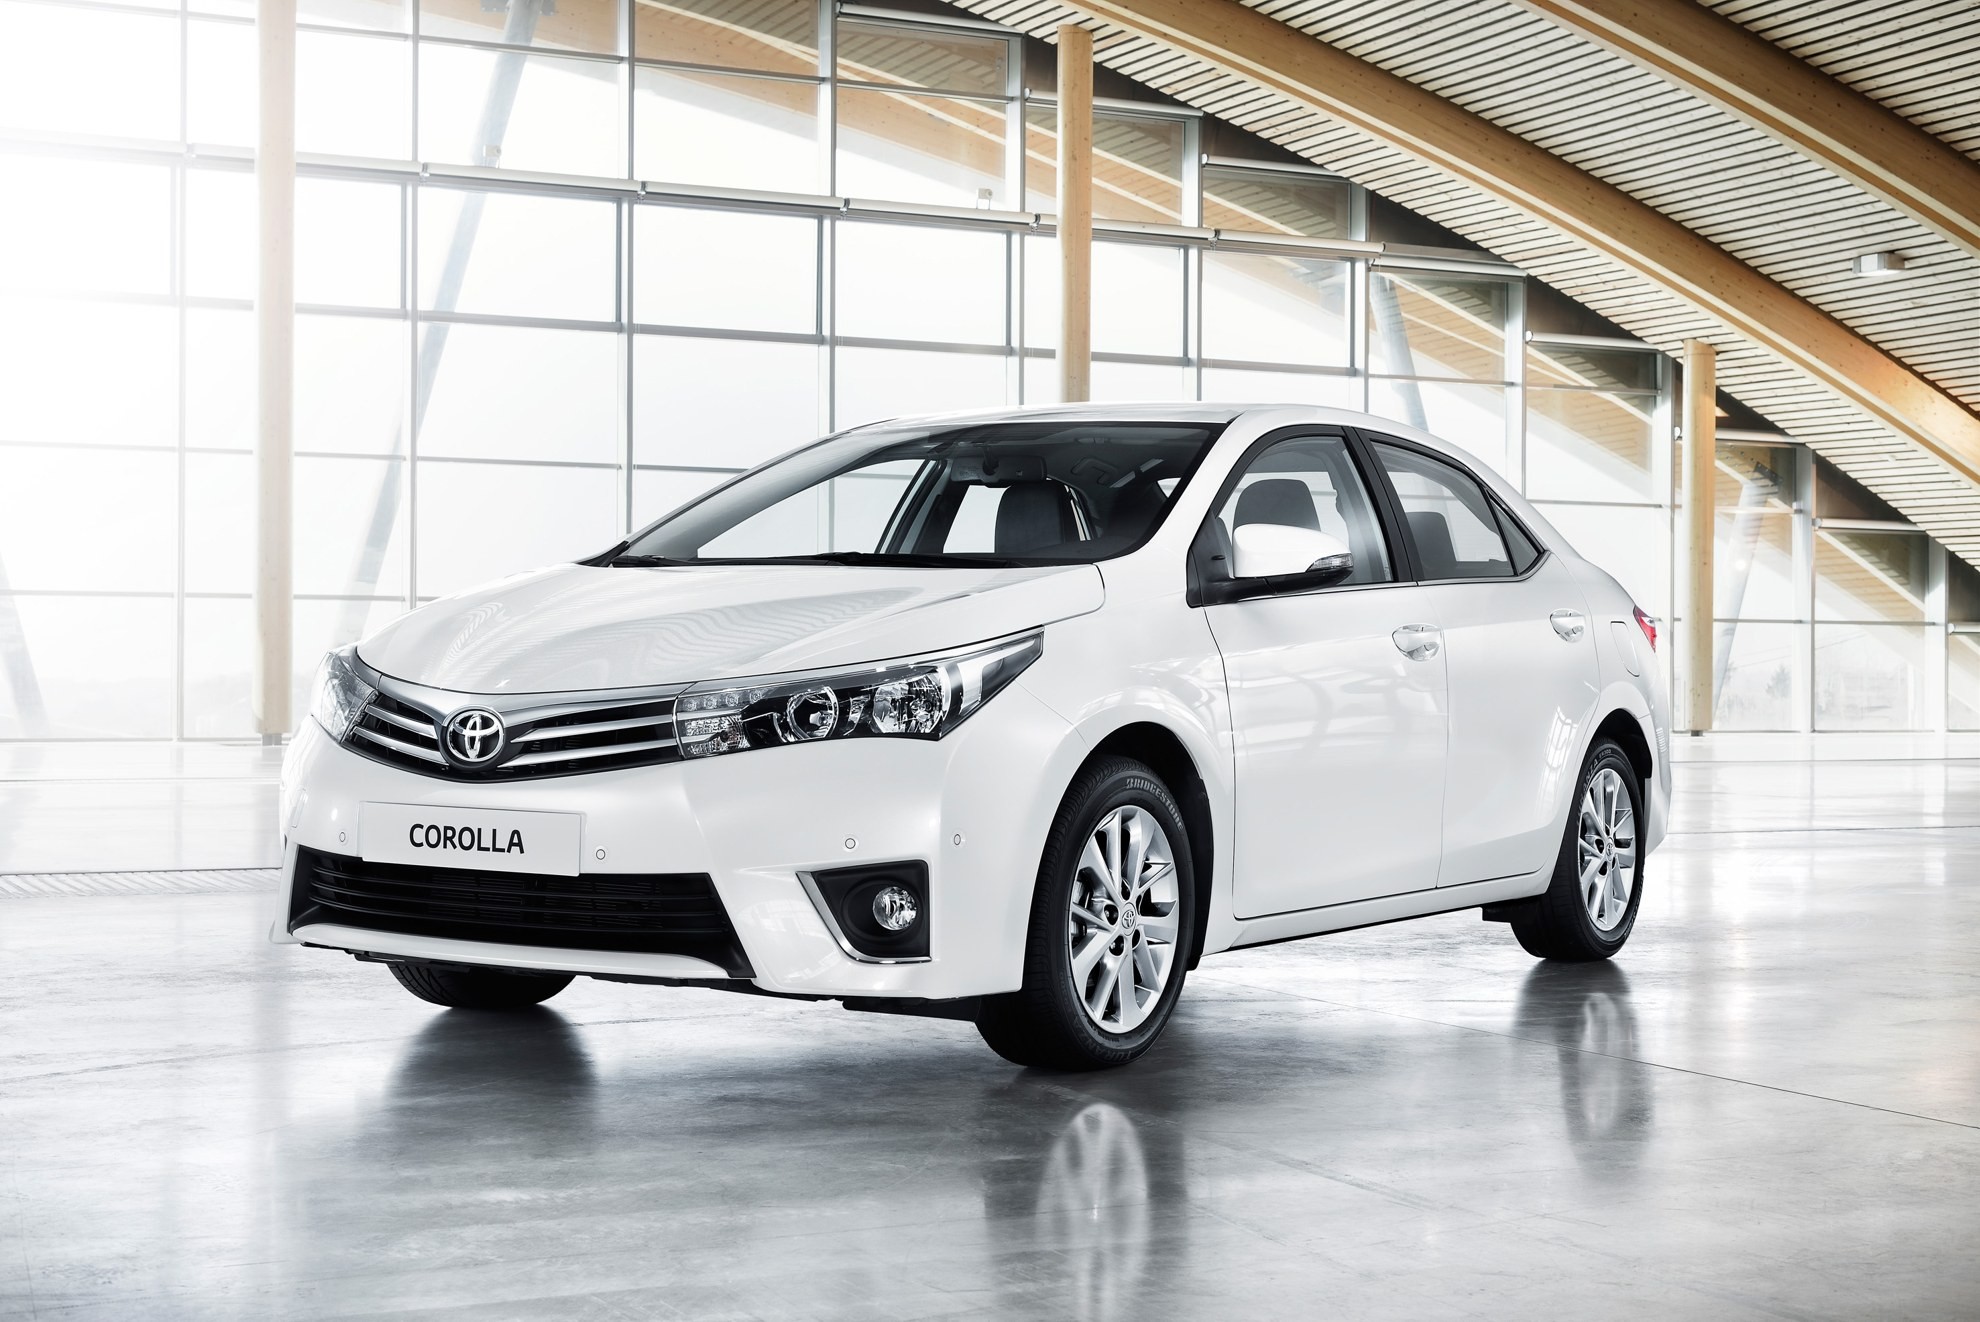 Toyota South Africa Car Sales August 2013